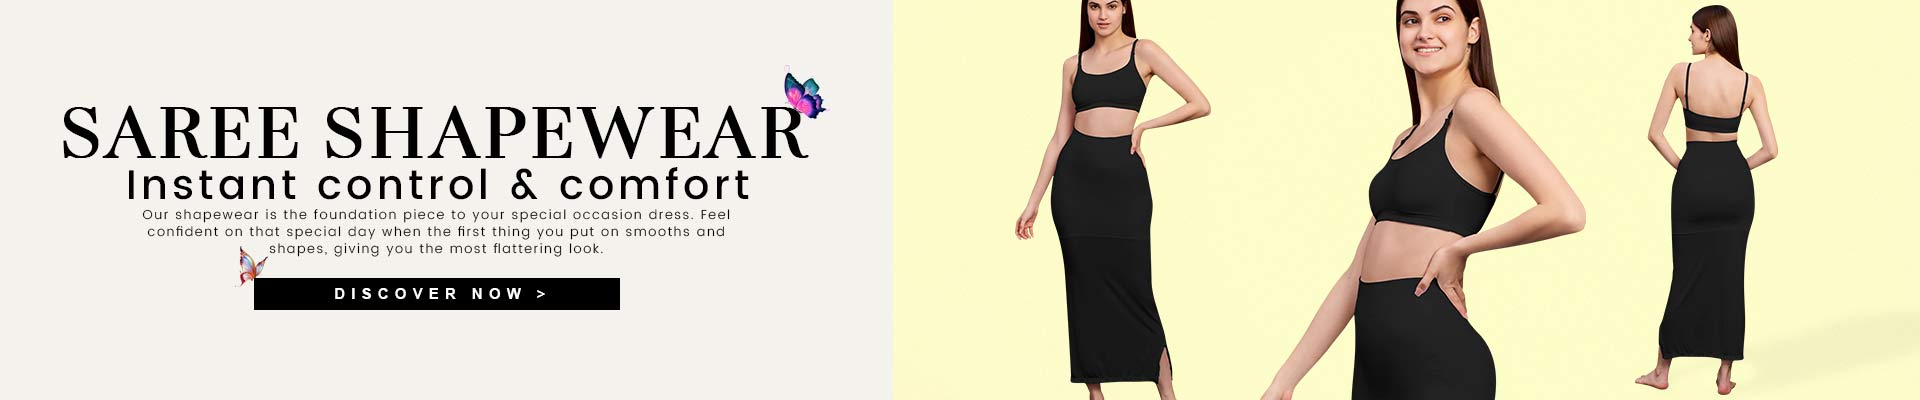 Things to Consider Before Buying Saree Shapewear